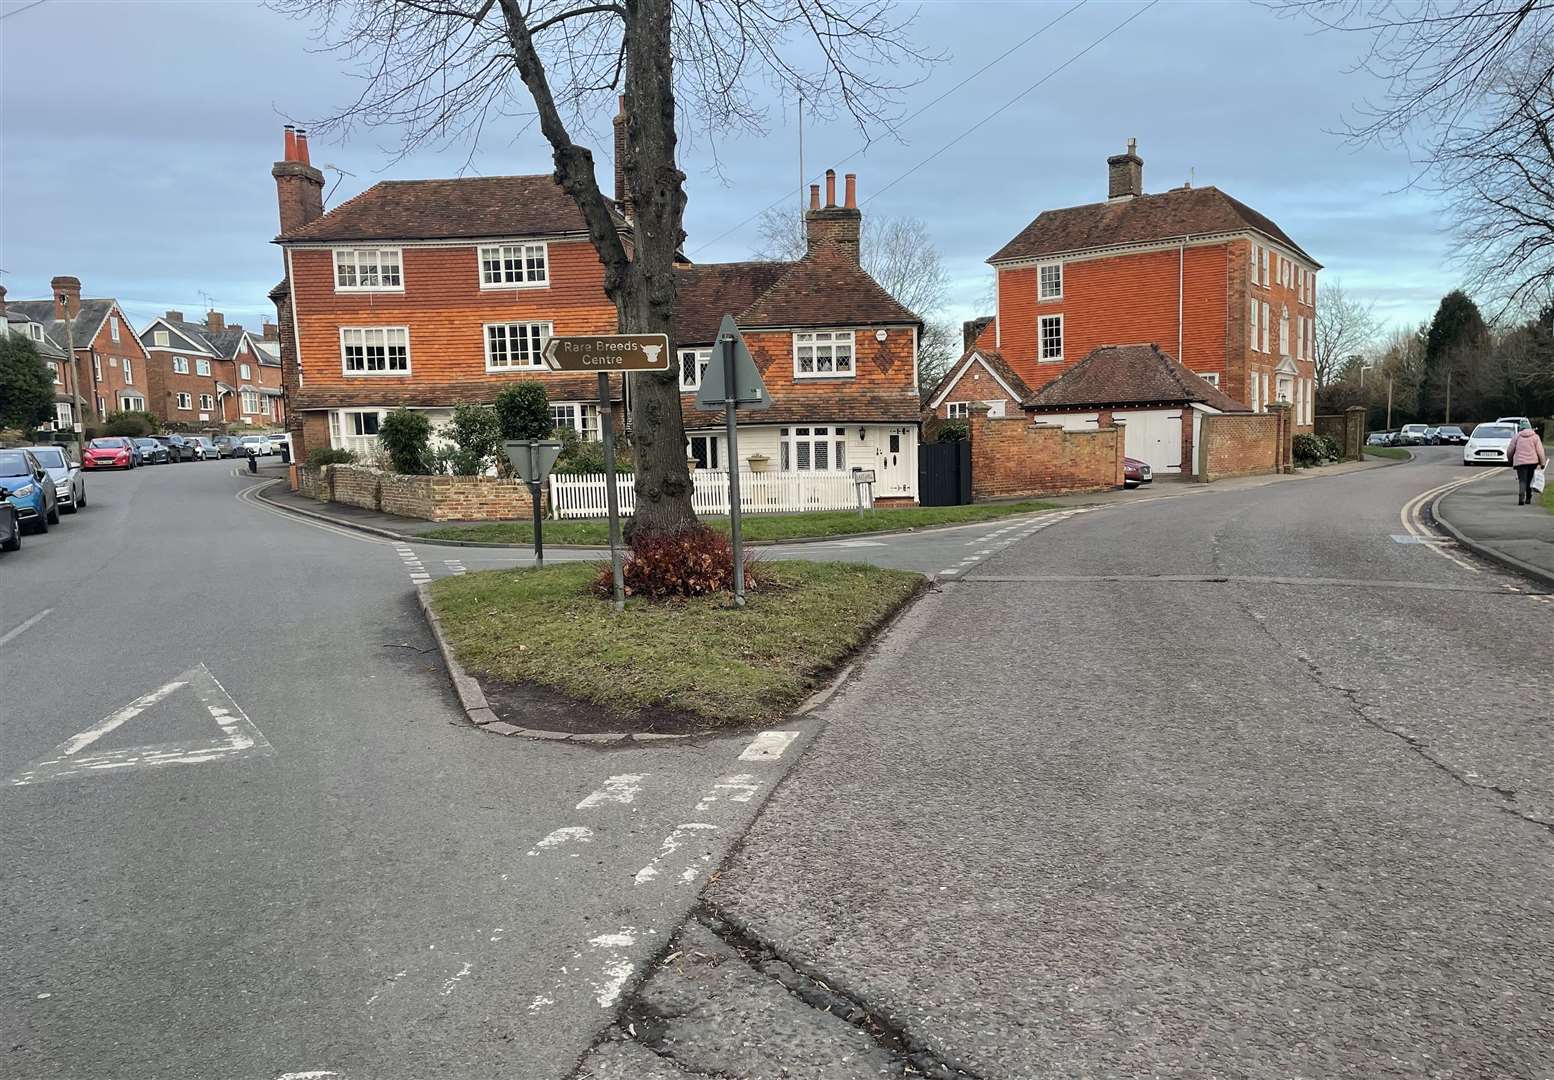 Tenterden Town Council wants to make changes to Golden Square and East Hill